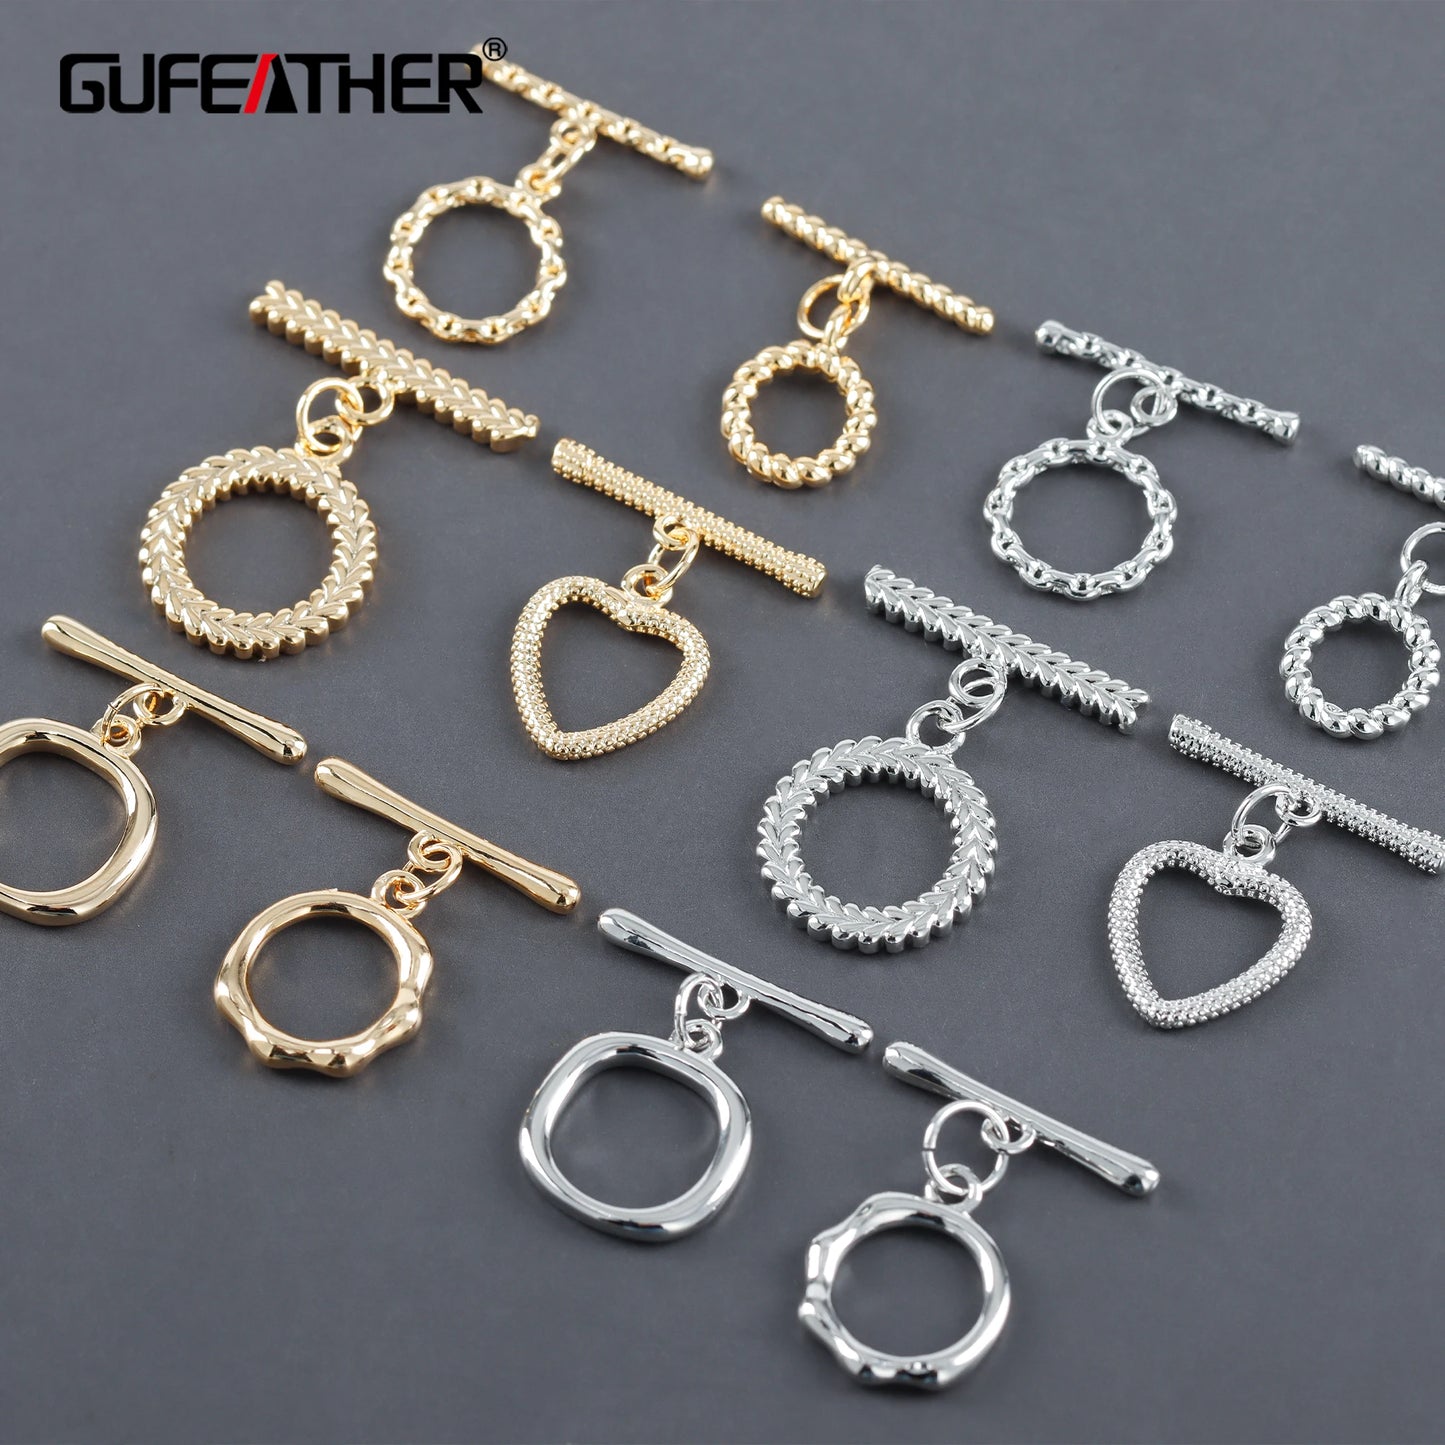 GUFEATHER M1126,jewelry accessories,chain connector,ot clasp,pass REACH,nickel free,18k gold plated,copper,diy jewelry,10pcs/lot